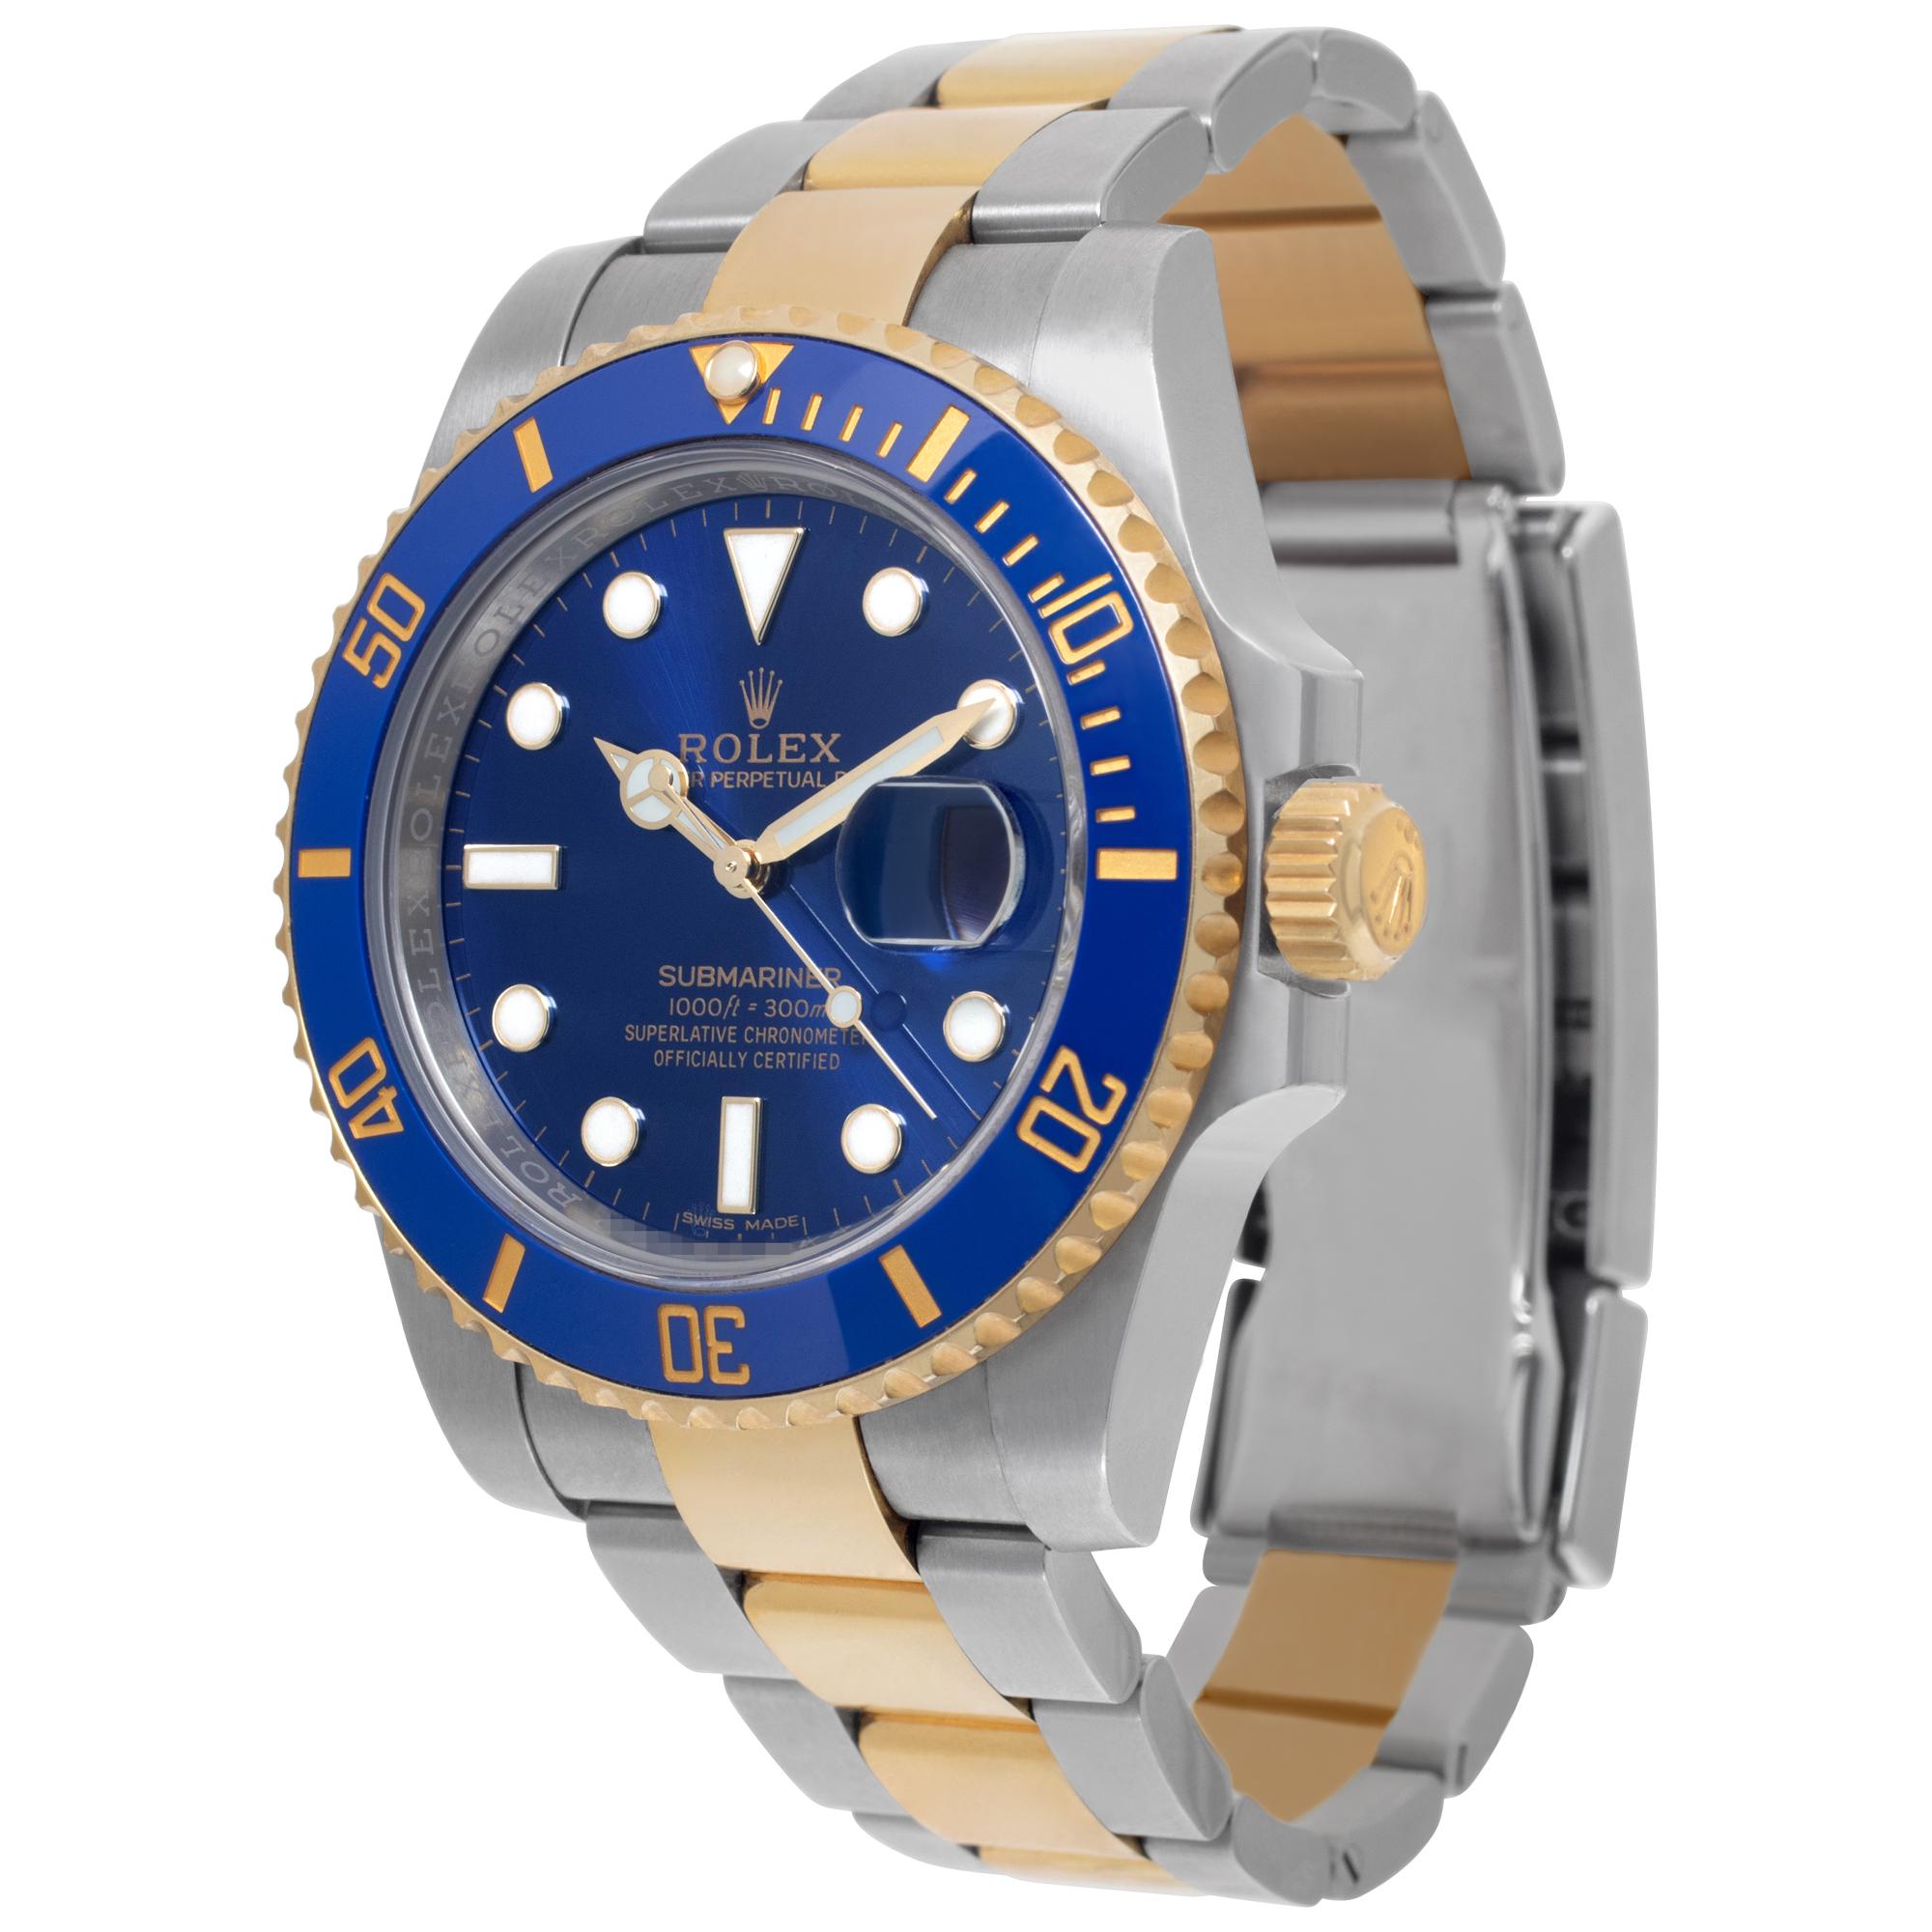 Rolex Submariner in 18k & stainless steel. Auto w/ sweep seconds and date. 40 mm case size. Ref 116613. **Bank wire only at this price** Fine Pre-owned Rolex Watch.

Certified preowned Sport Rolex Submariner 116613 watch is made out of Gold and